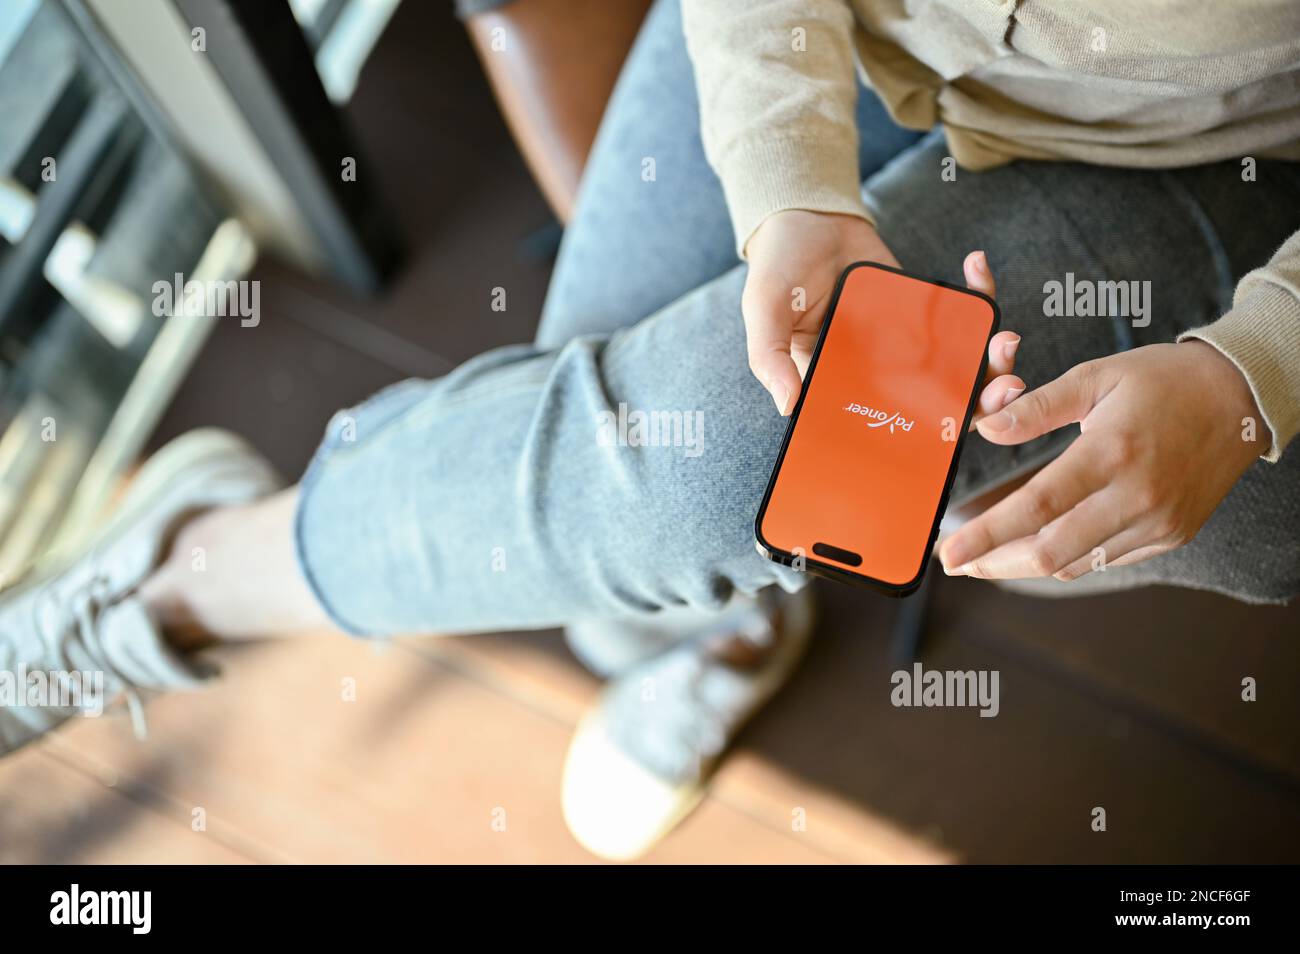 Chiang mai, Thailand - Feb 14 2023: Above view of an Asian woman using Payoneer application on her smartphone. smartphone with PAyoneer logo on screen Stock Photo